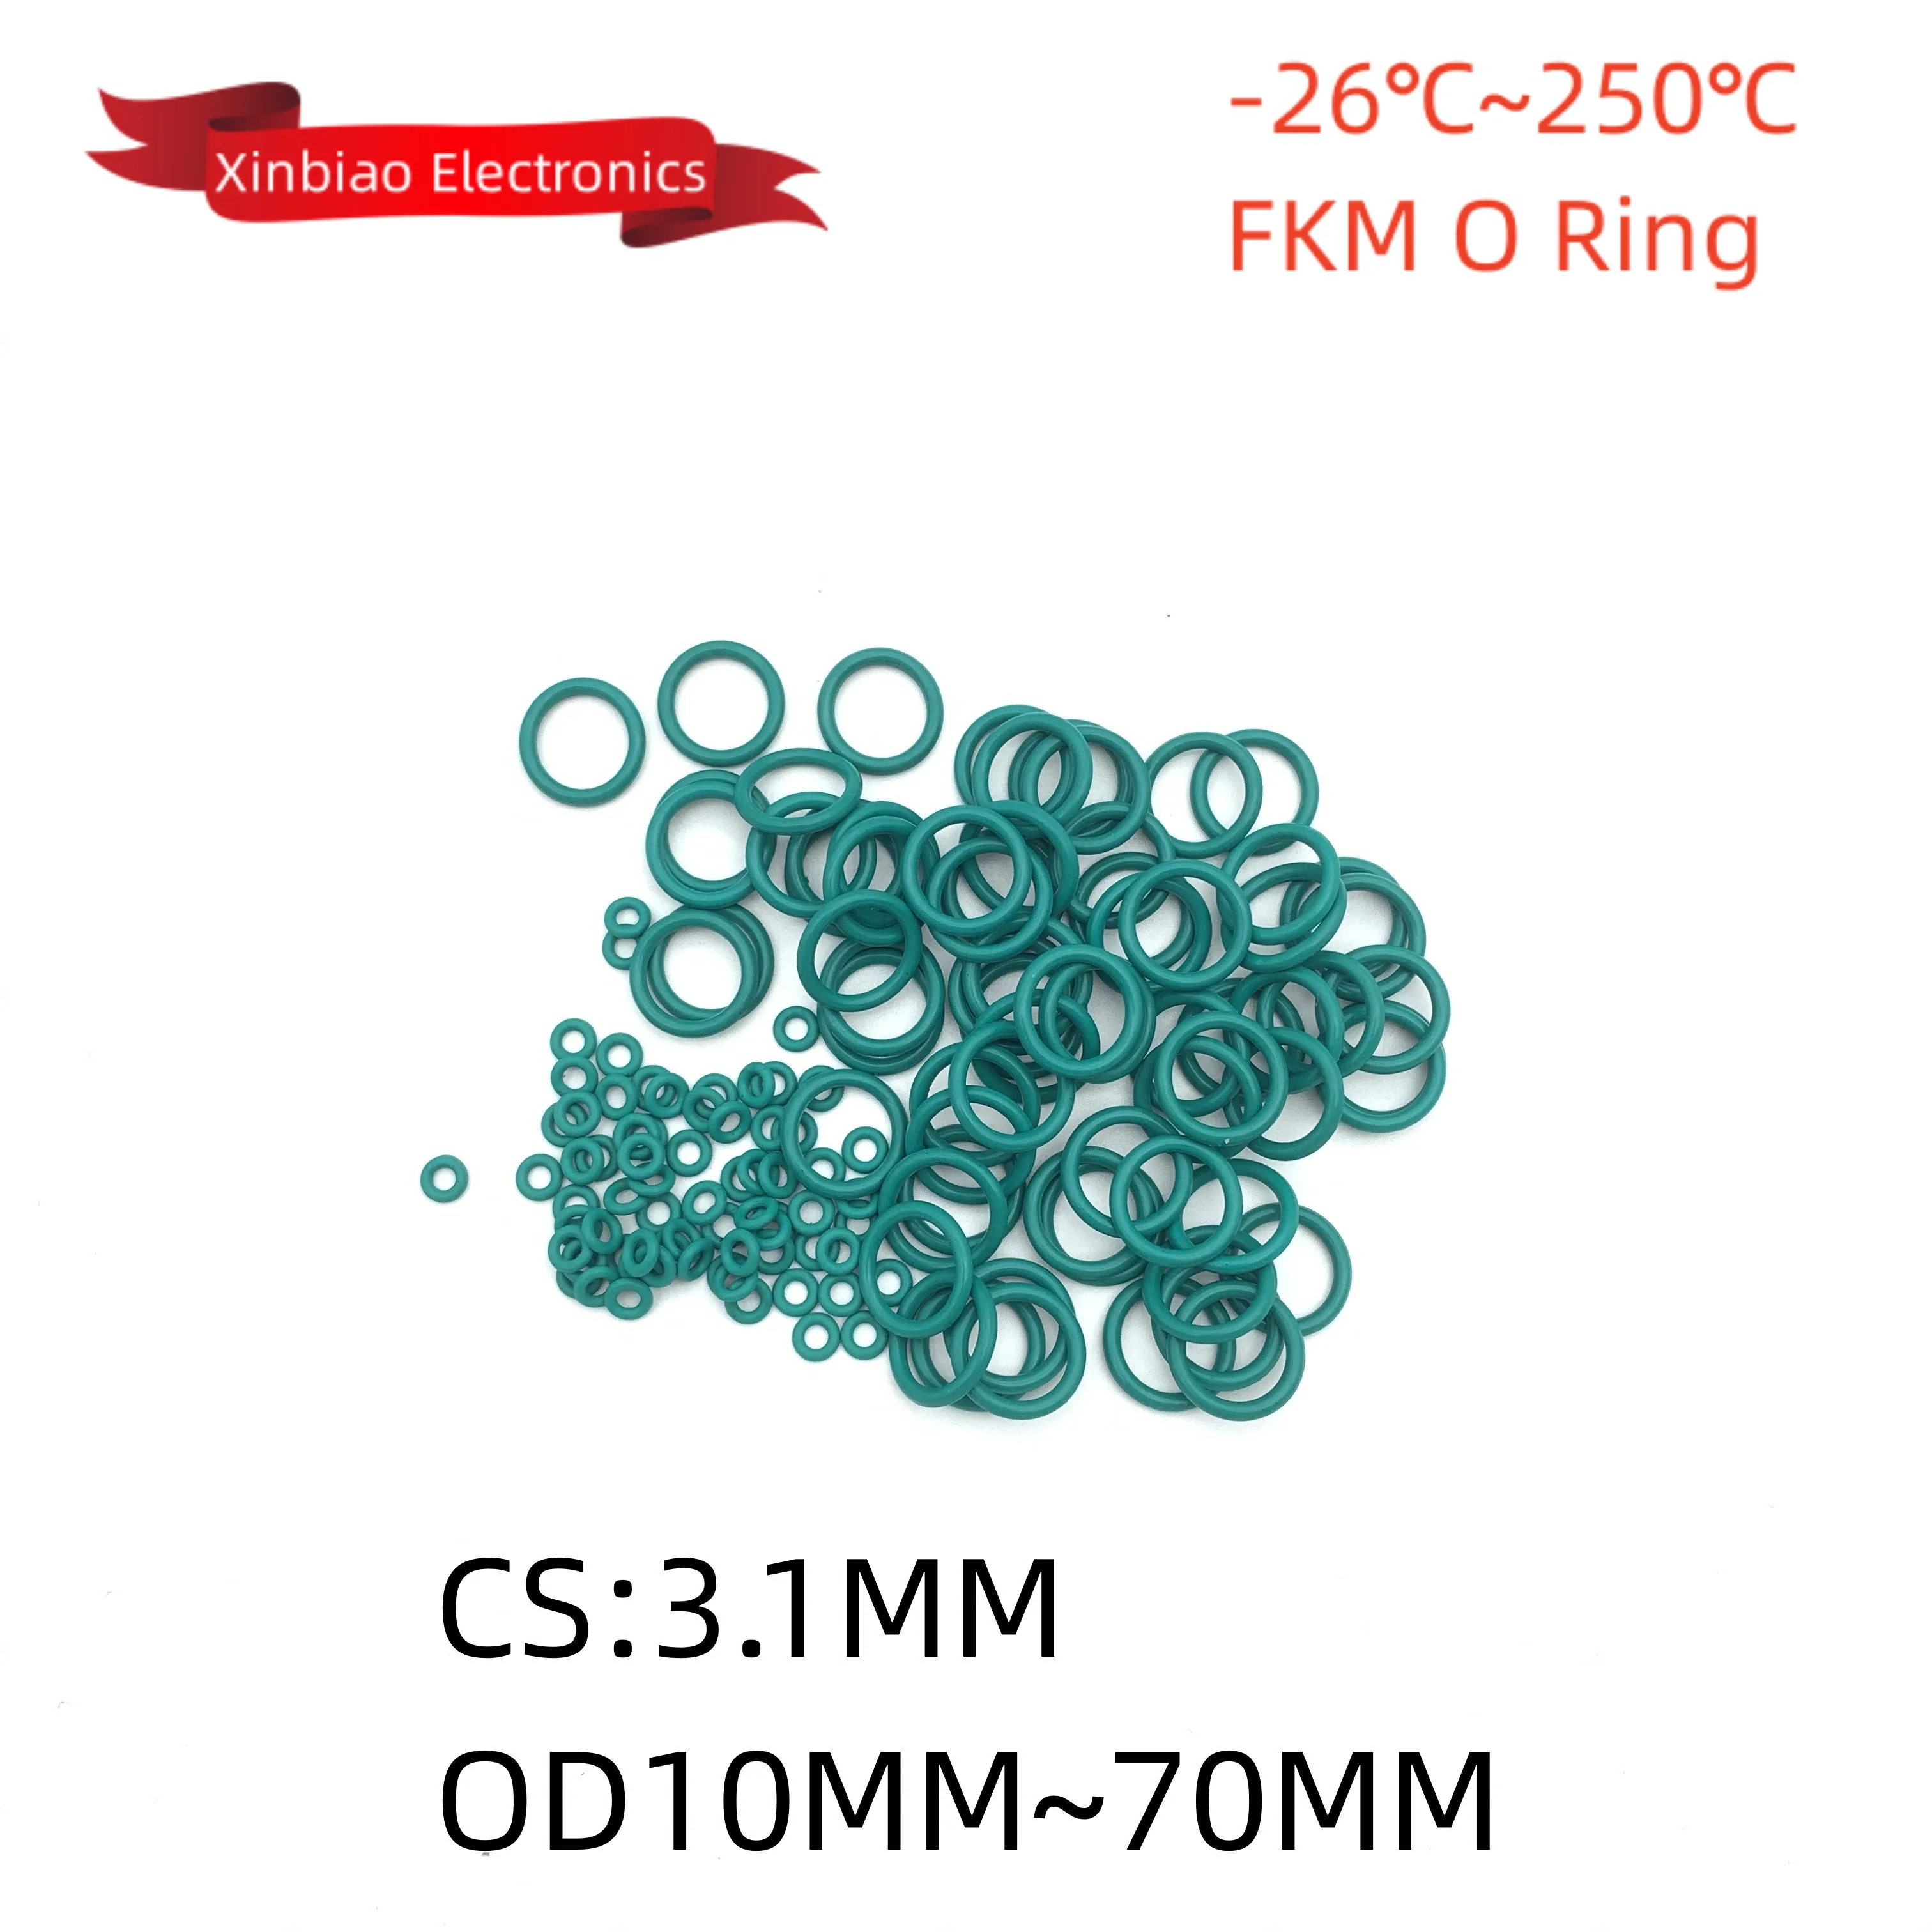 

50pcs Superior FKM Fluorine Rubber CS 3.1mm OD 10mm~70mm O Ring Sealing Gasket Insulation Oil High Temperature Resistance Green